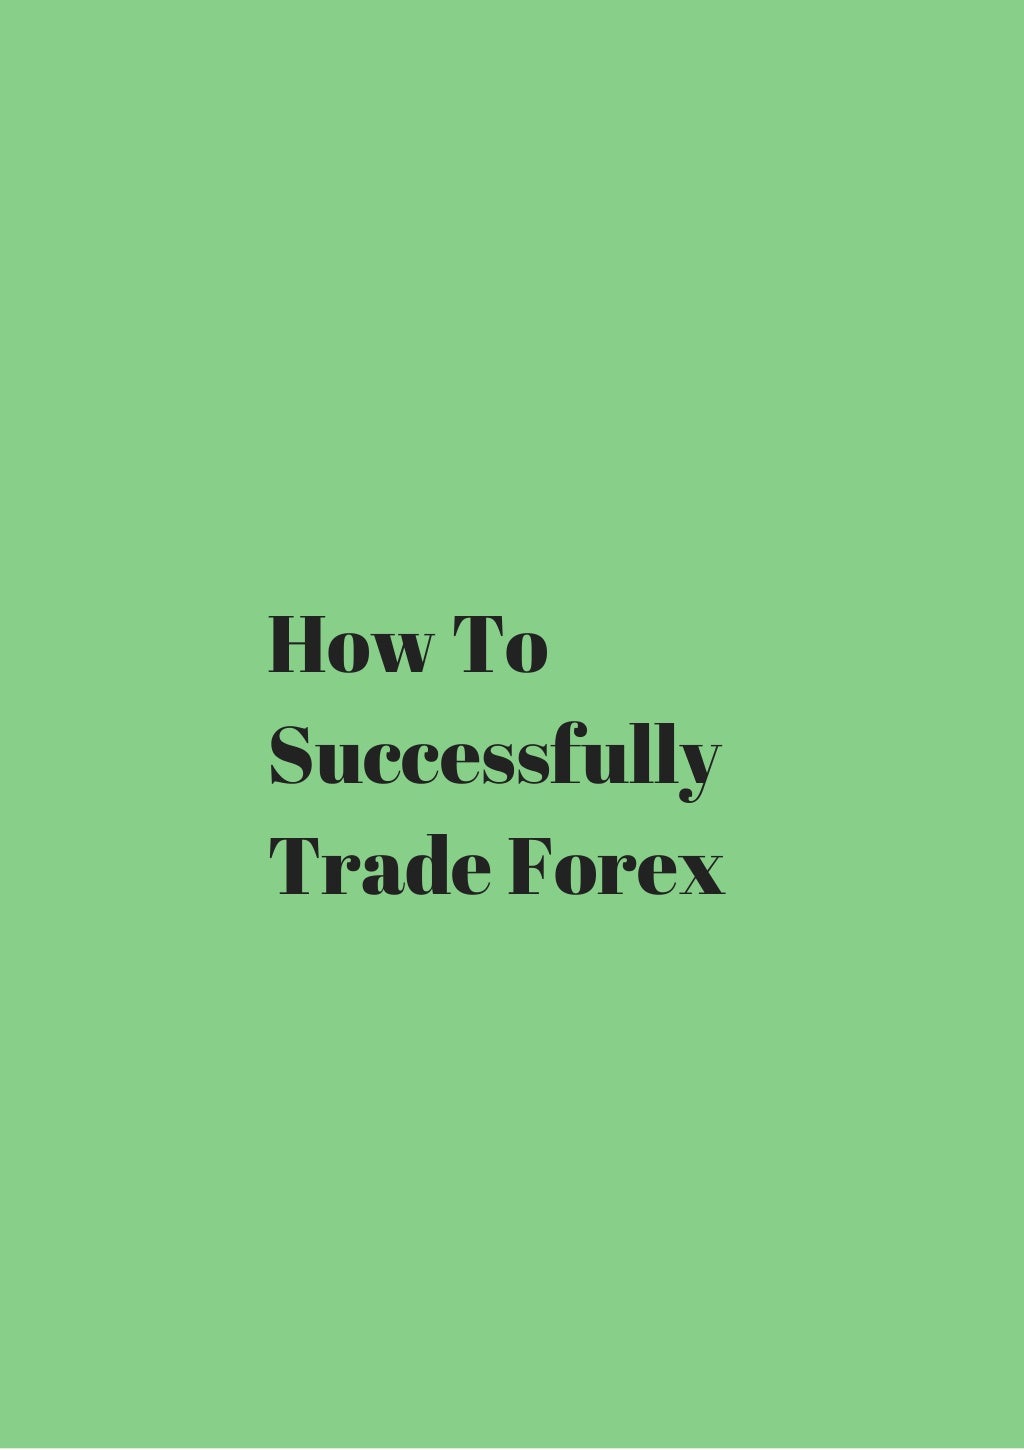 How to successfully trade forex